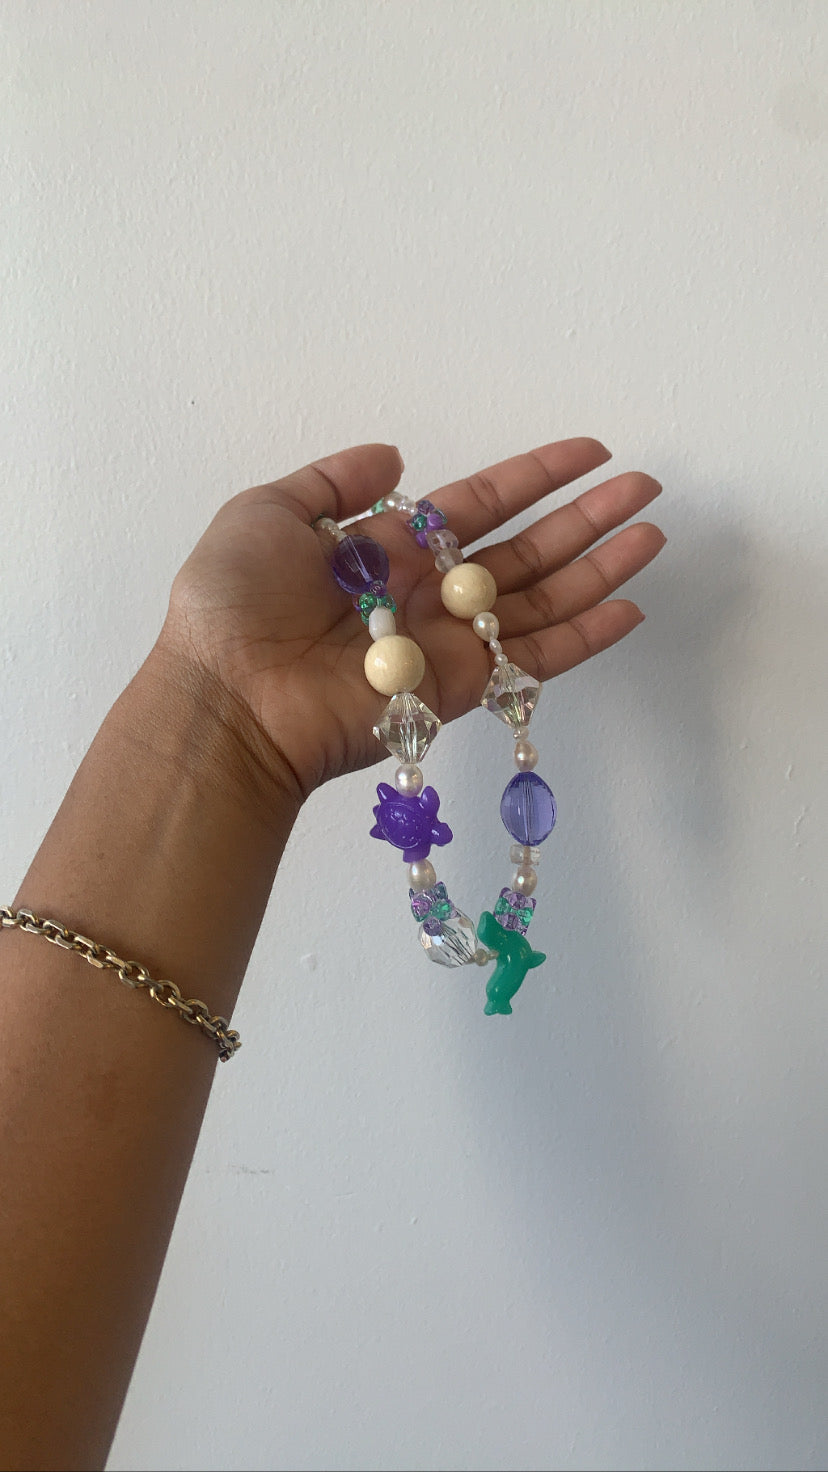 “Under the Sea" Upcycled Necklace